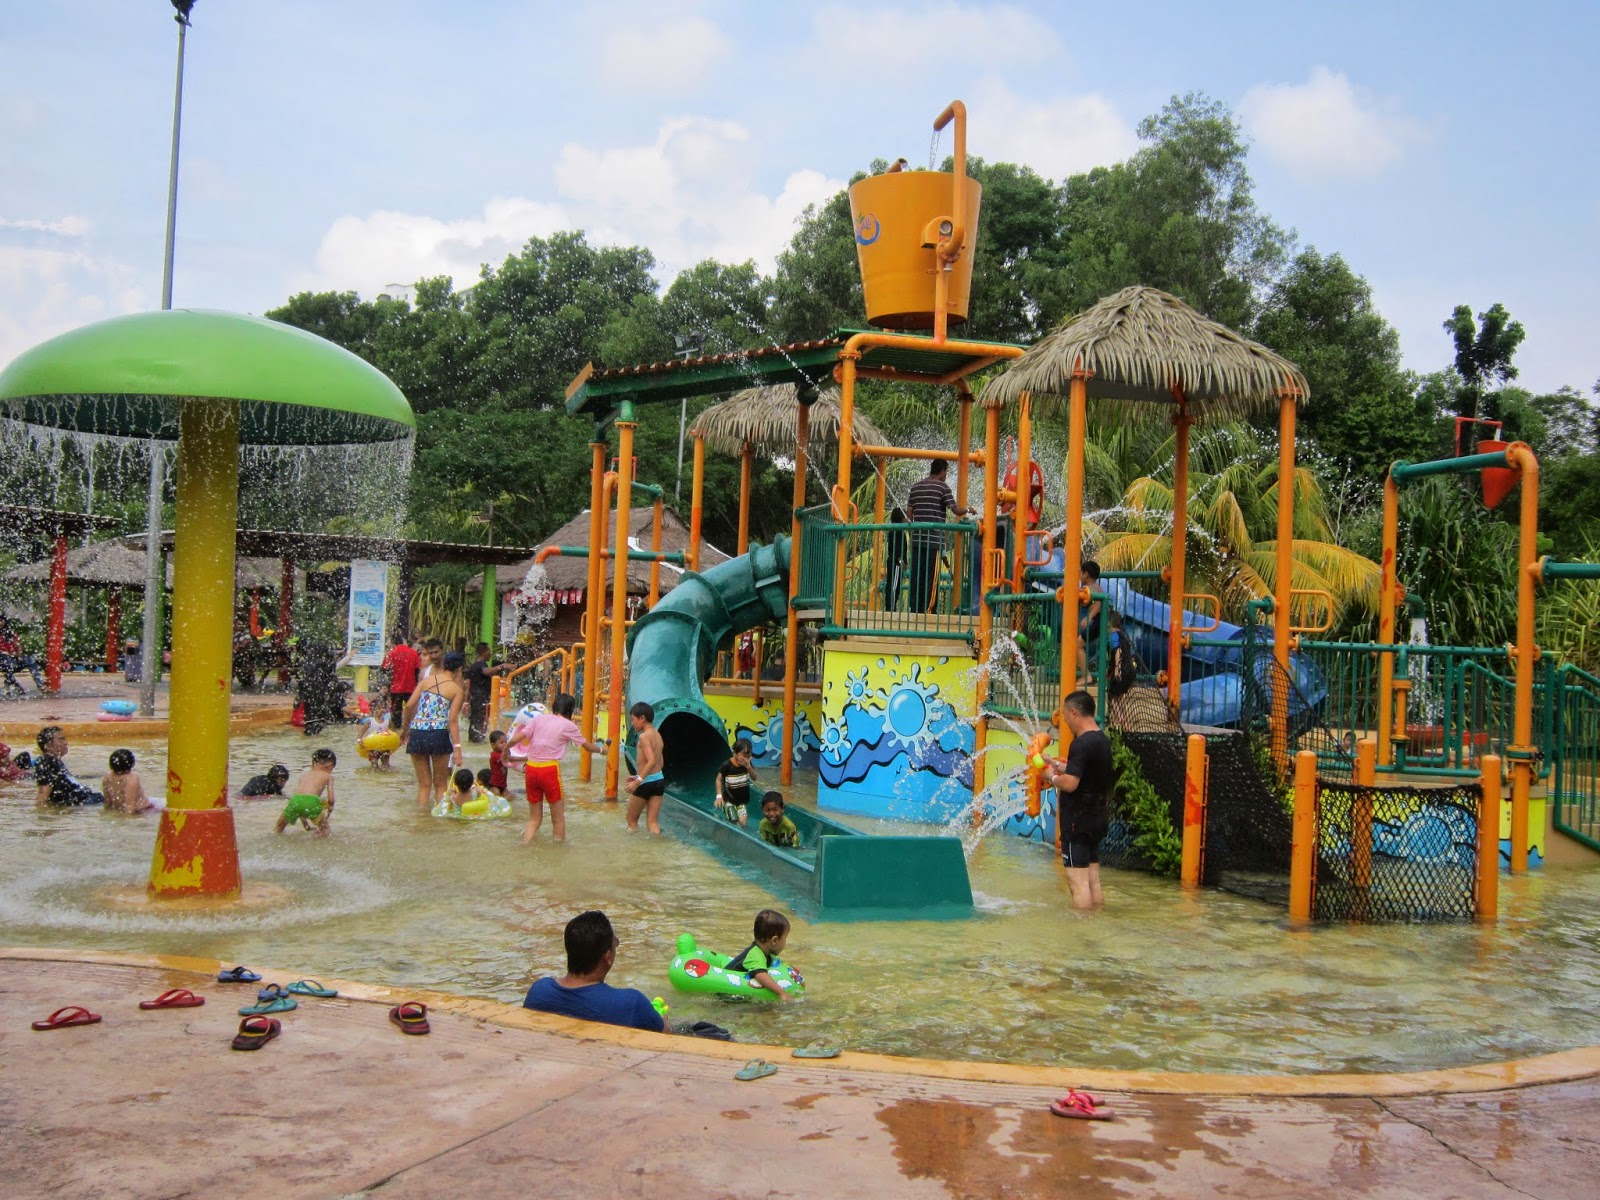 Sungai Petani Water Park : When the air conditioning just isn't cutting